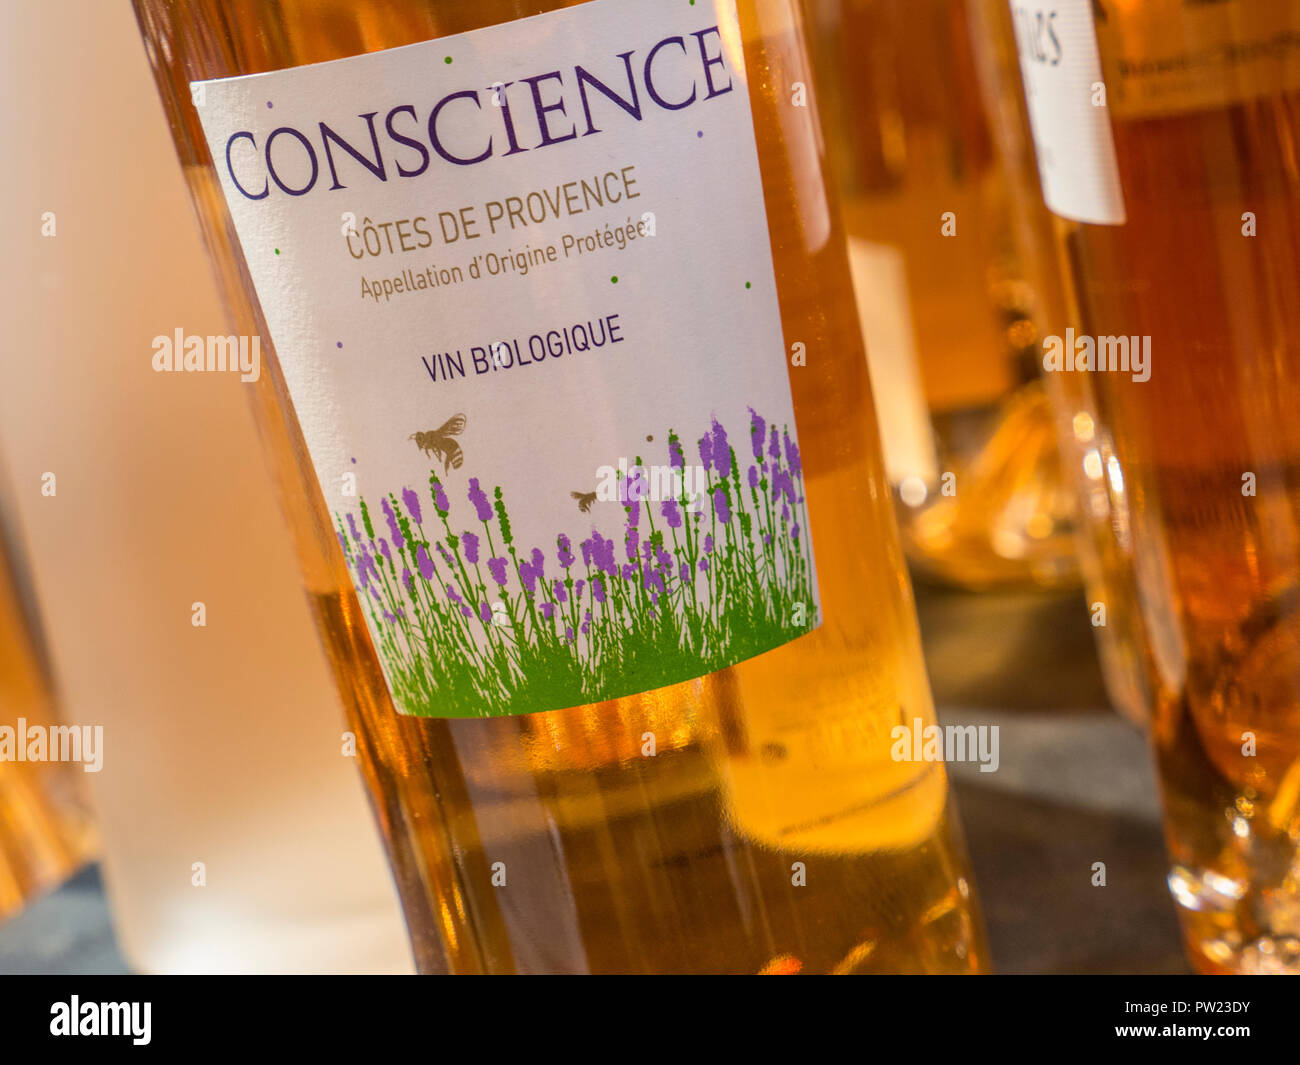 Cotes de Provence Biologique Wine Bottles ‘Conscience’. Produced organically in harmony with the terroir without chemical additives or crop spraying Stock Photo